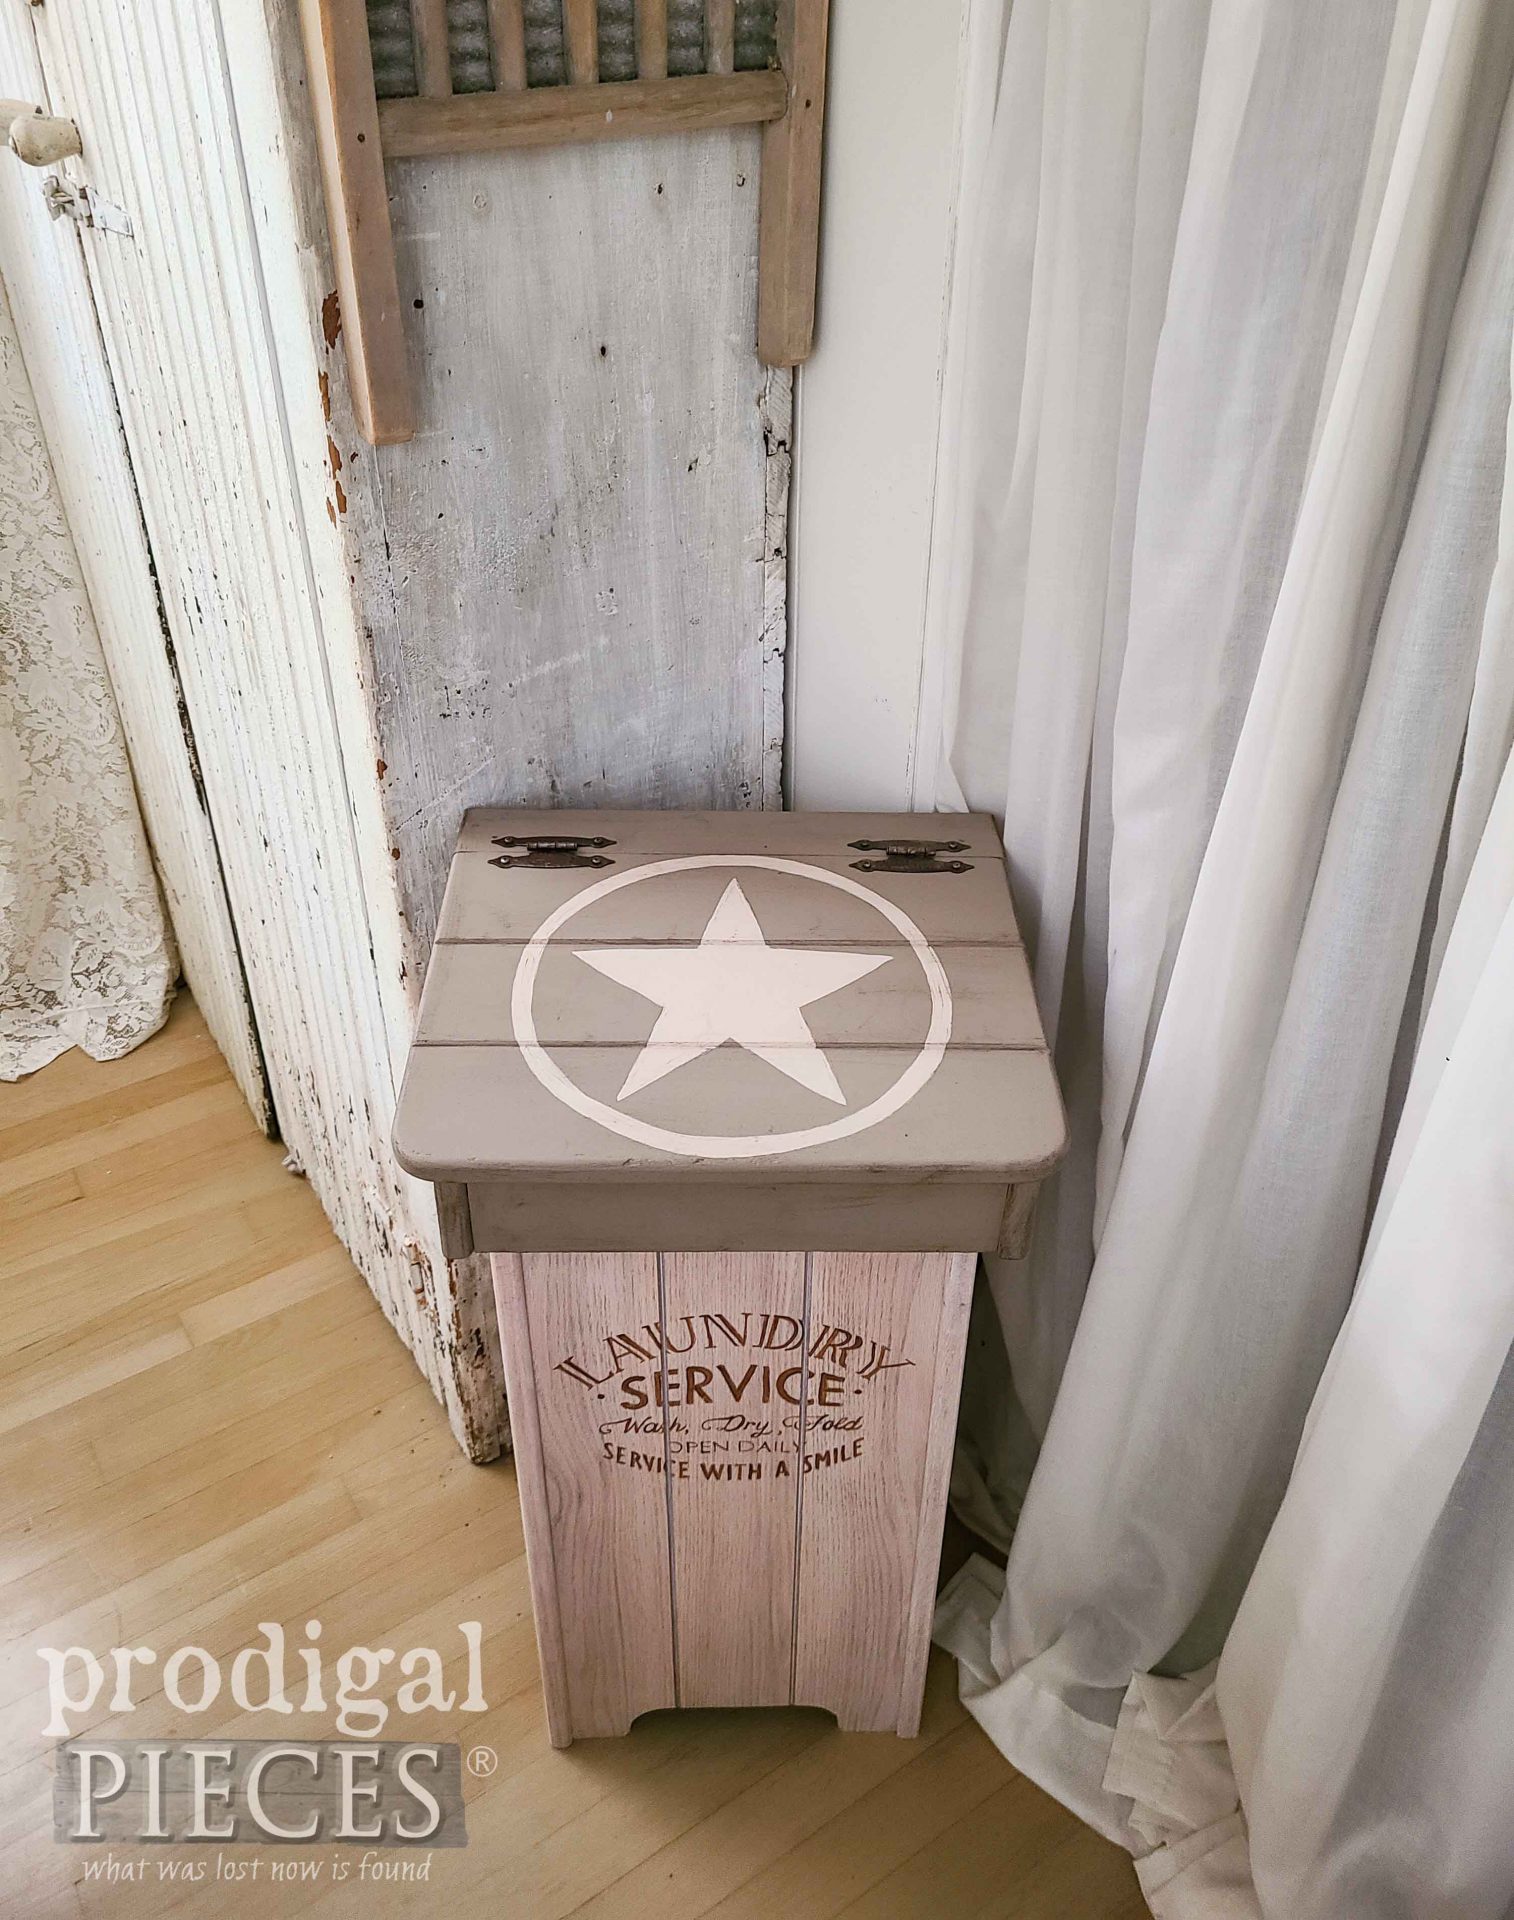 Top View of Hand-Painted Laundry Bin from Repurposed Vintage Wooden Trash Bin by Larissa of Prodigal Pieces | prodigalpieces.com #prodigalpieces #laundry #diy #vintage